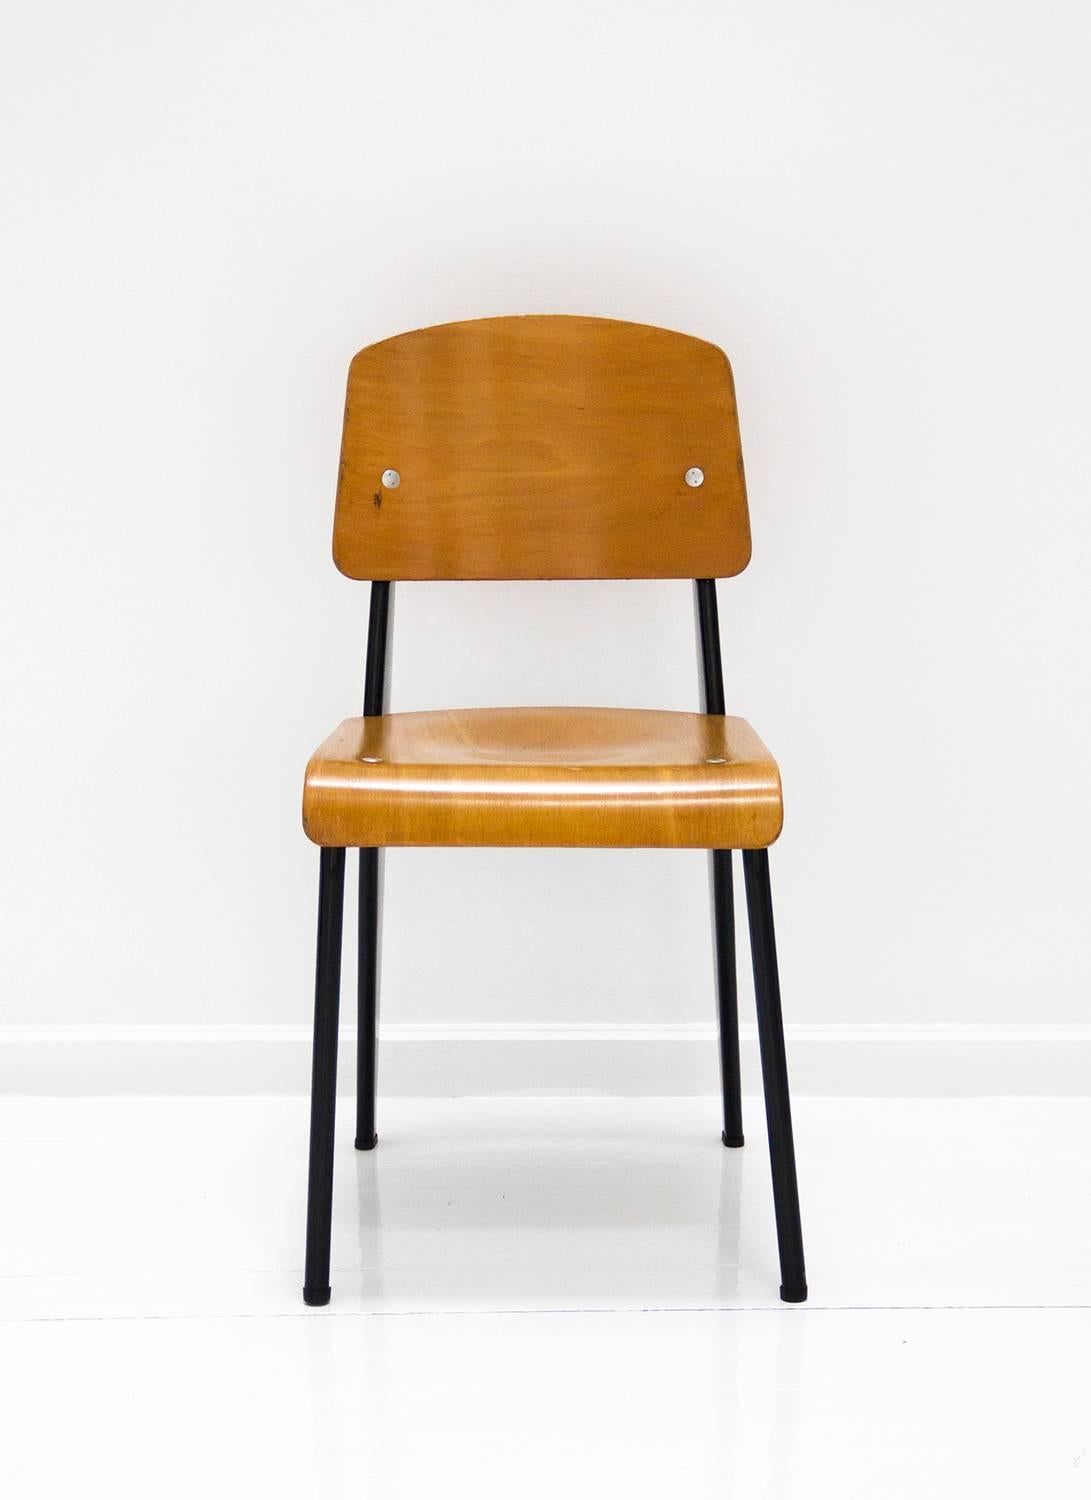 Standard chair, model Métropole No. 305 chair designed by Jean Prouvé. 
Made of bent steel and molded plywood,
circa 1950, France.
 